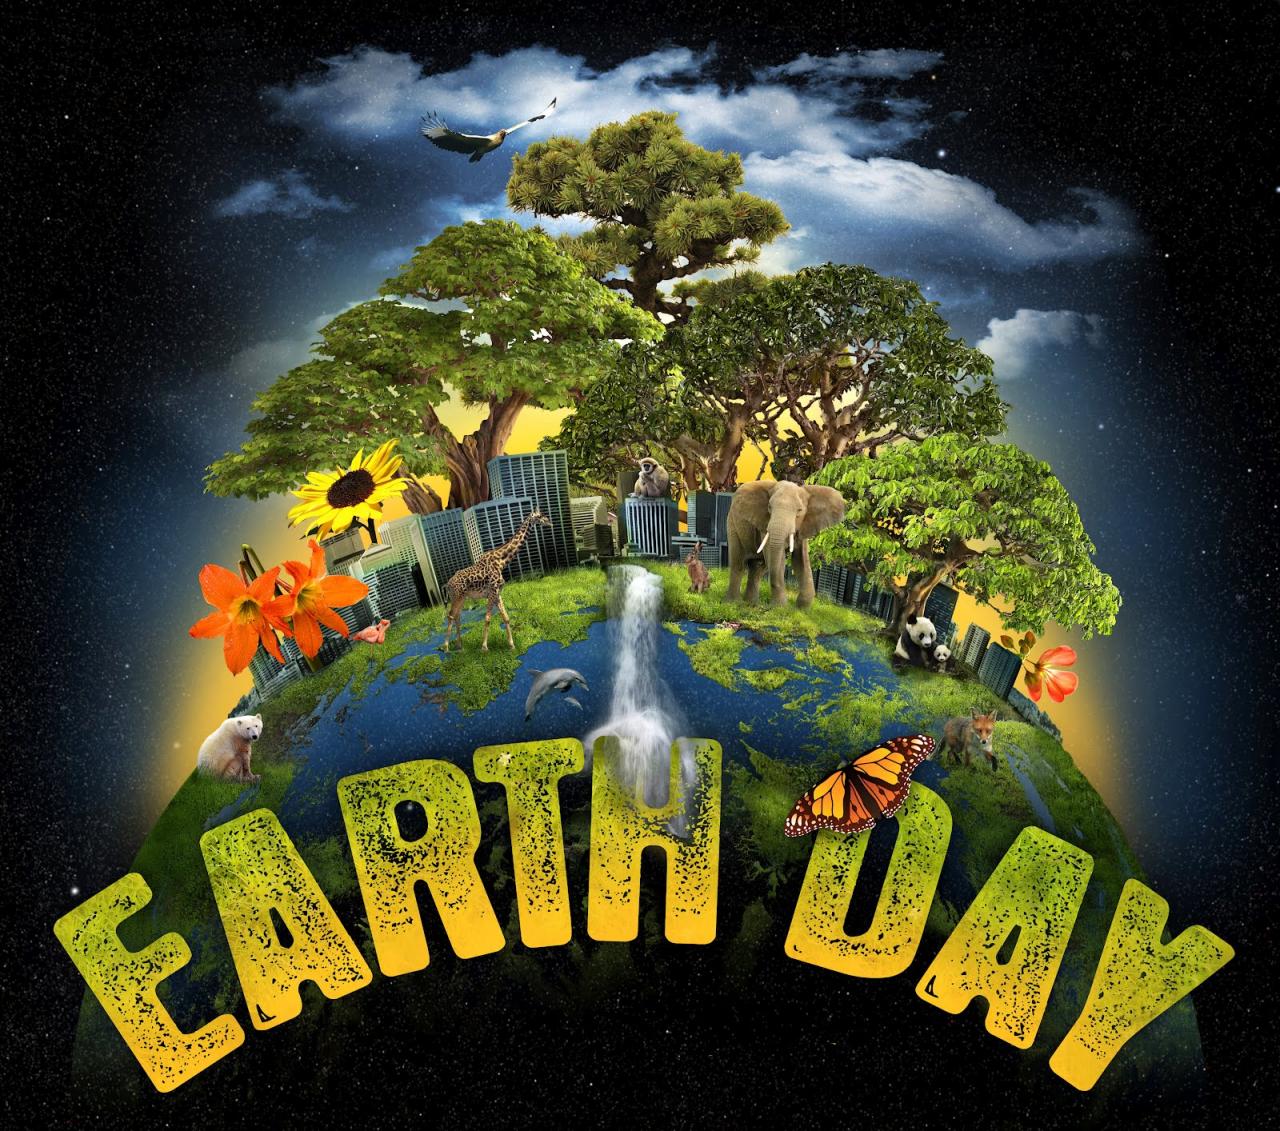 What Government Actions Resulted from Early Earth Day Celebrations?